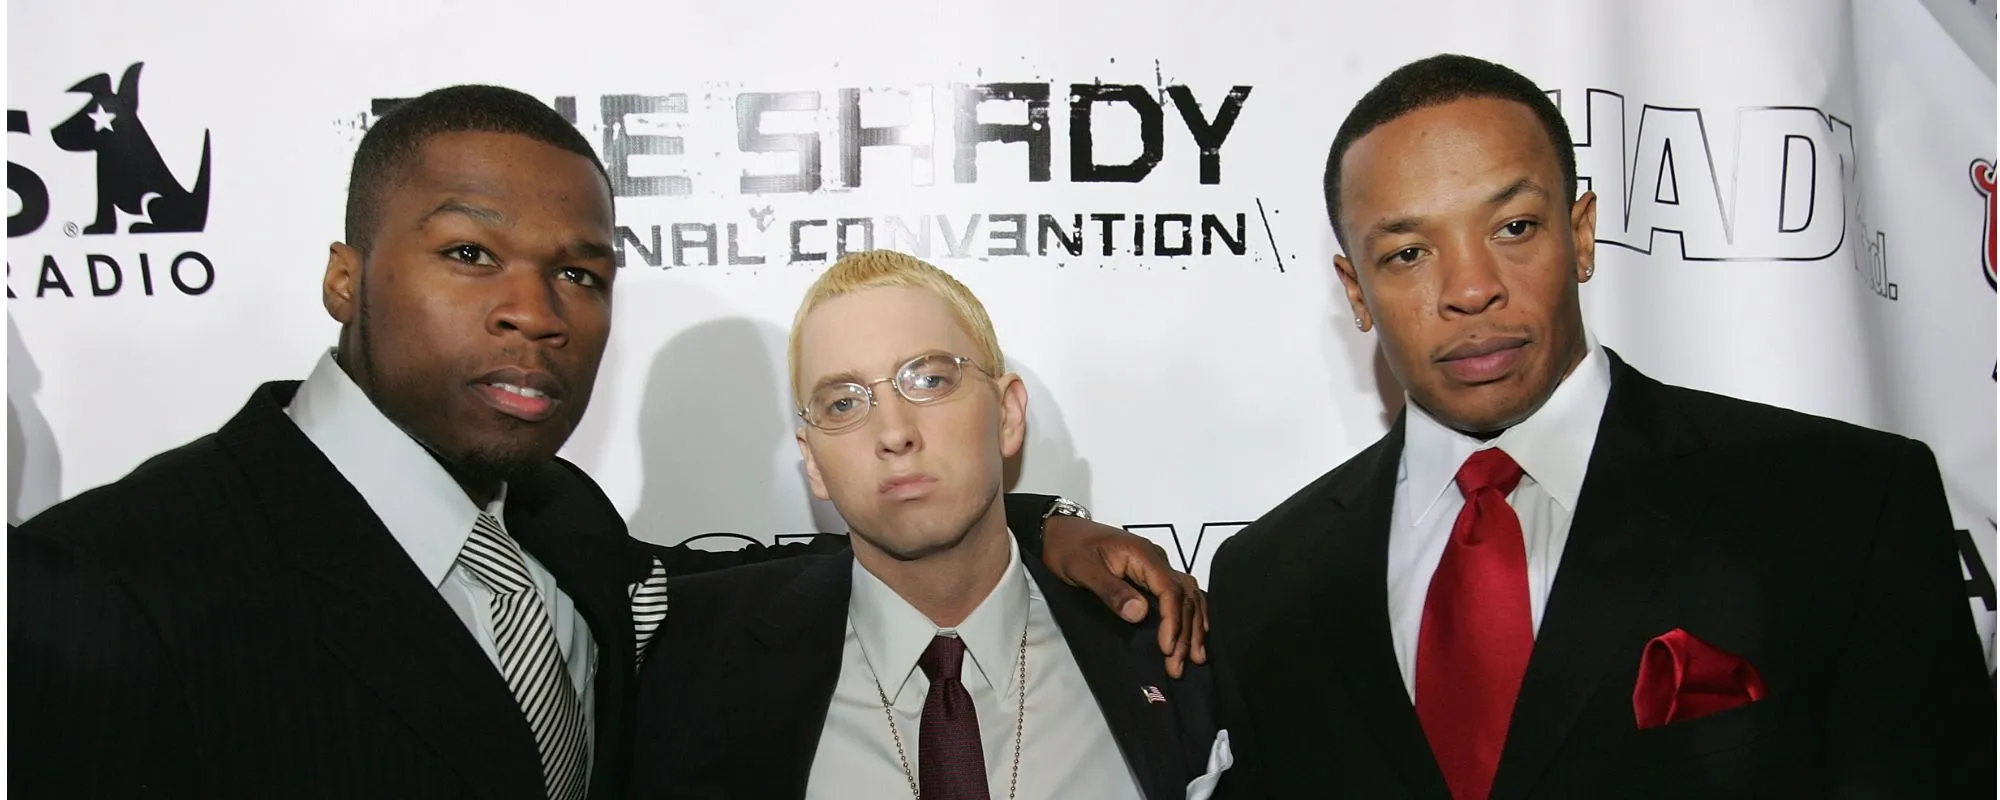 The Complicated Meaning Behind Eminem, 50 Cent, and Dr. Dre’s “Crack a Bottle”